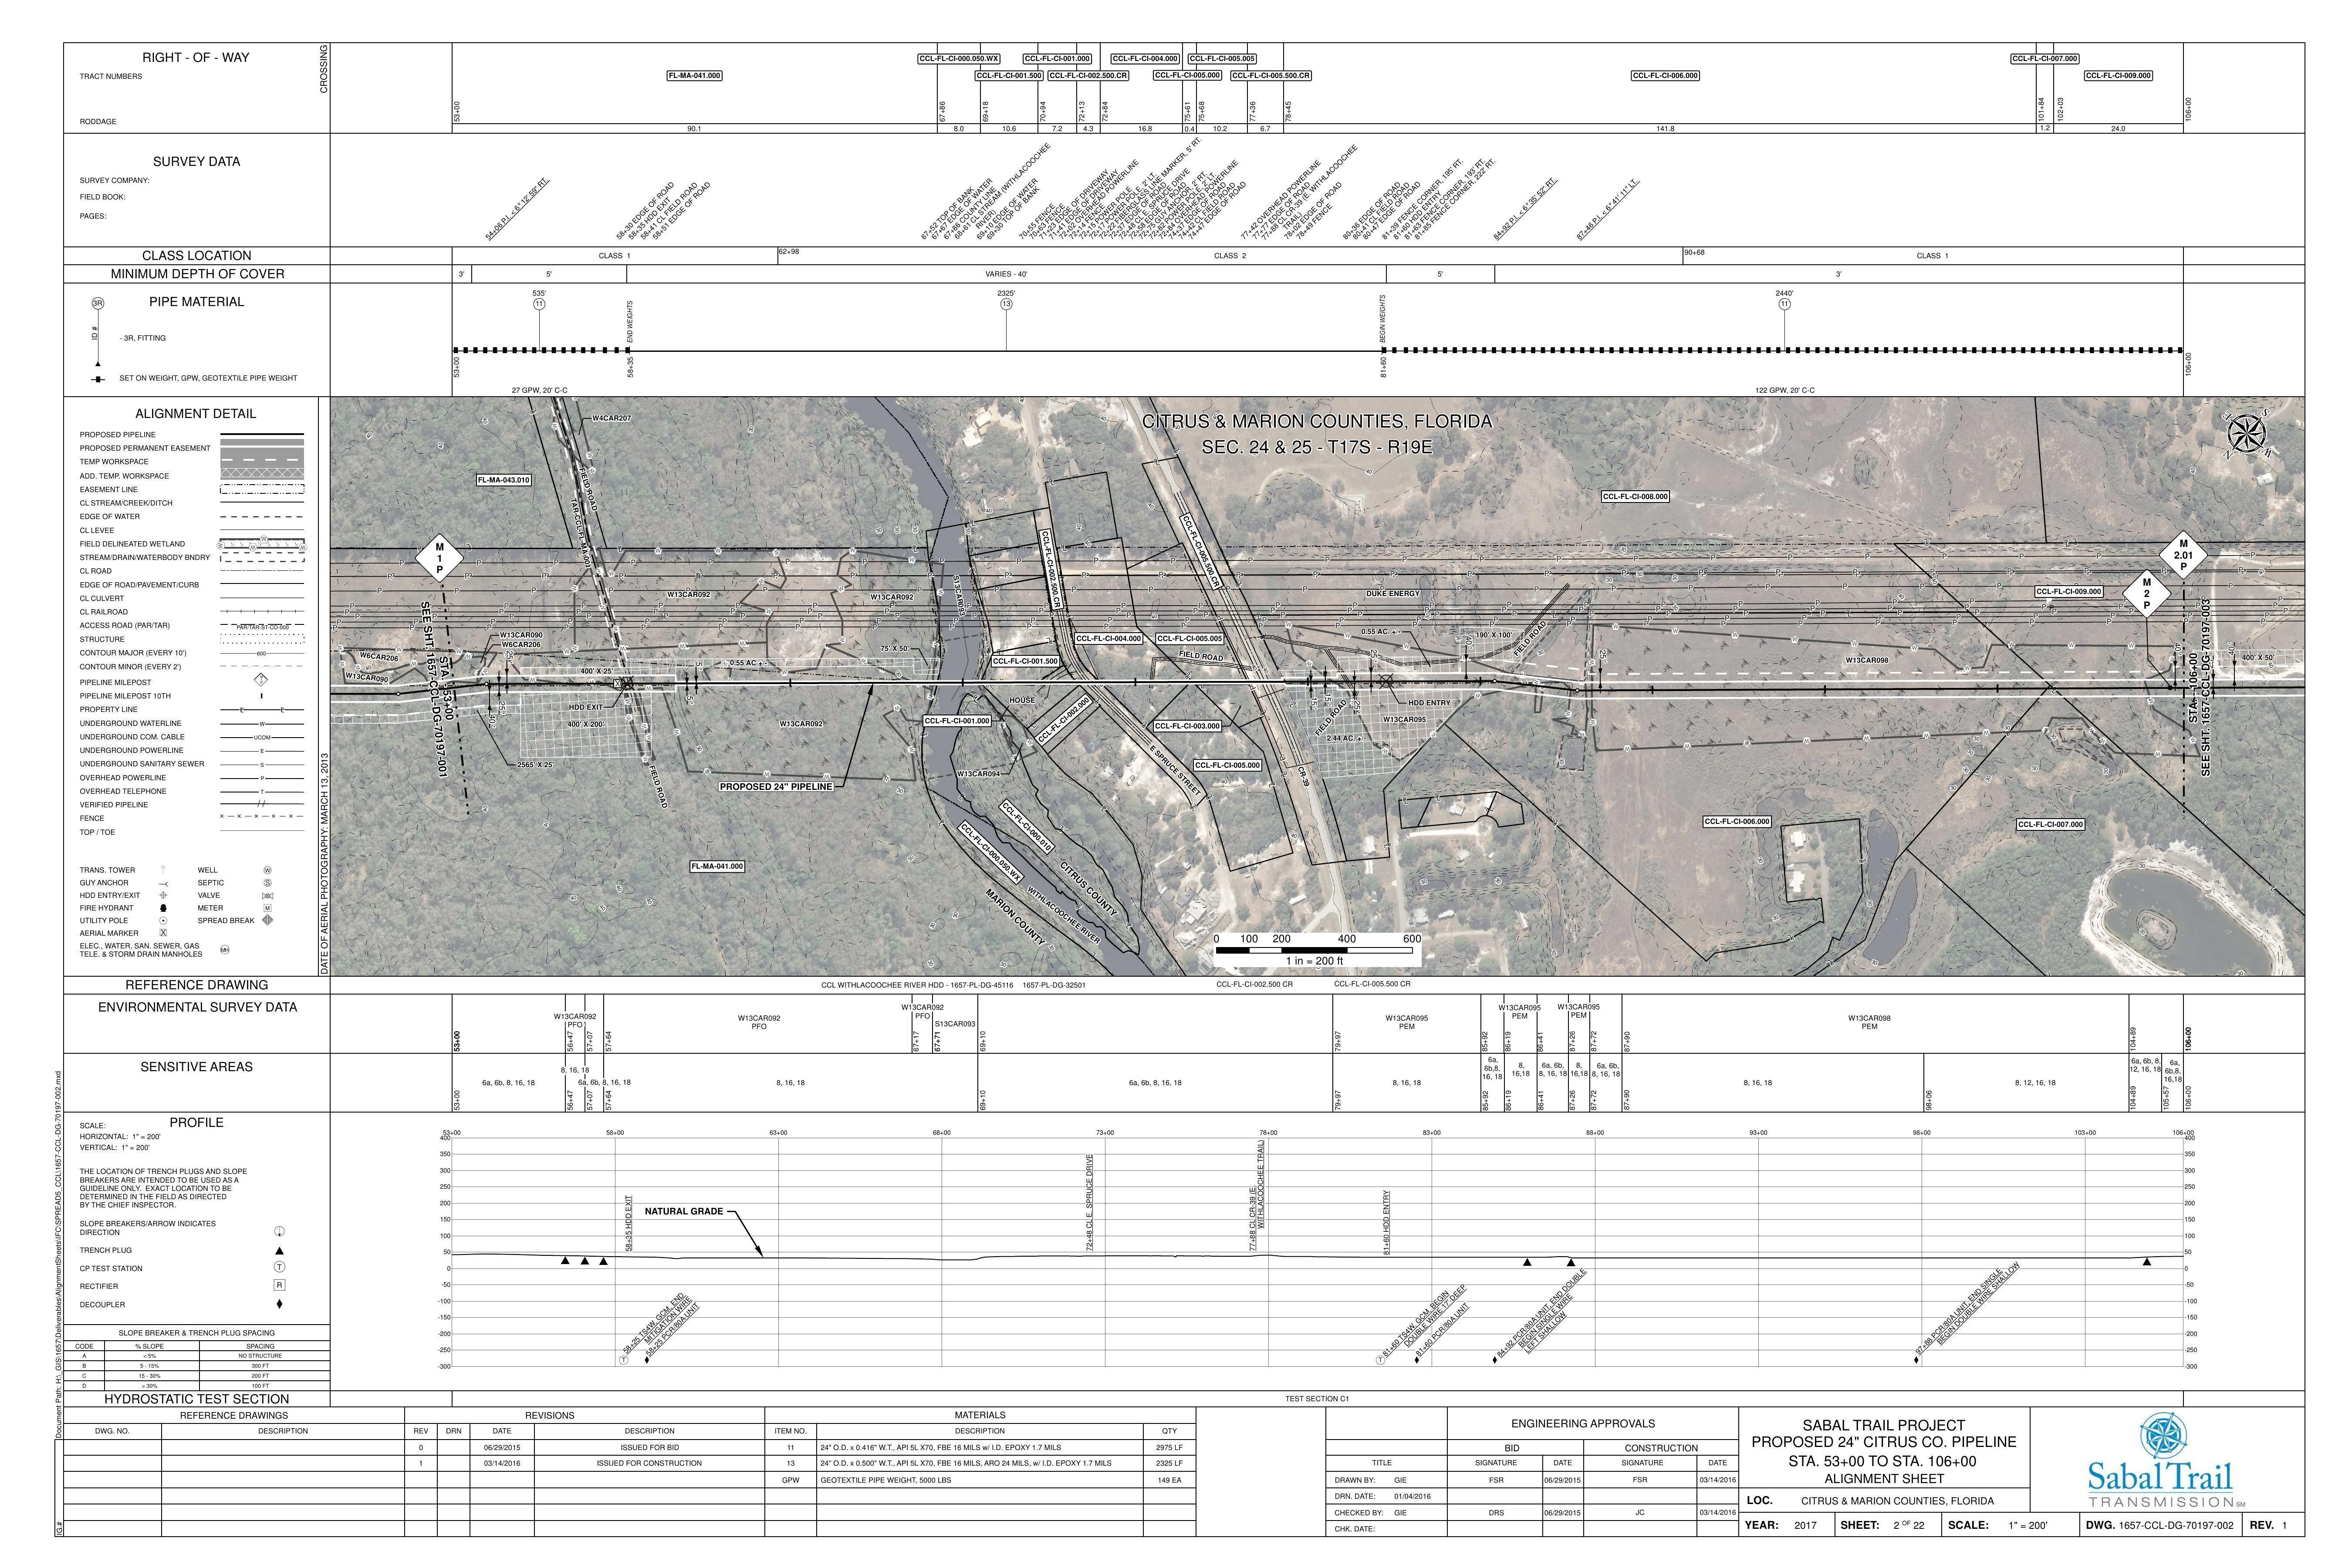 [1657-CCL-DG-70197-002, STA. 53+00 TO STA. 106+00, CCL WITHLACOOCHEE RIVER HDD - 1657-PL-DG-45116, E Withlacoochee Trail, E. Spruce Drive, PROPOSED 24-inch CITRUS CO. PIPELINE, CITRUS & MARION COUNTIES, FLORIDA, 28.99002, -82.36057]